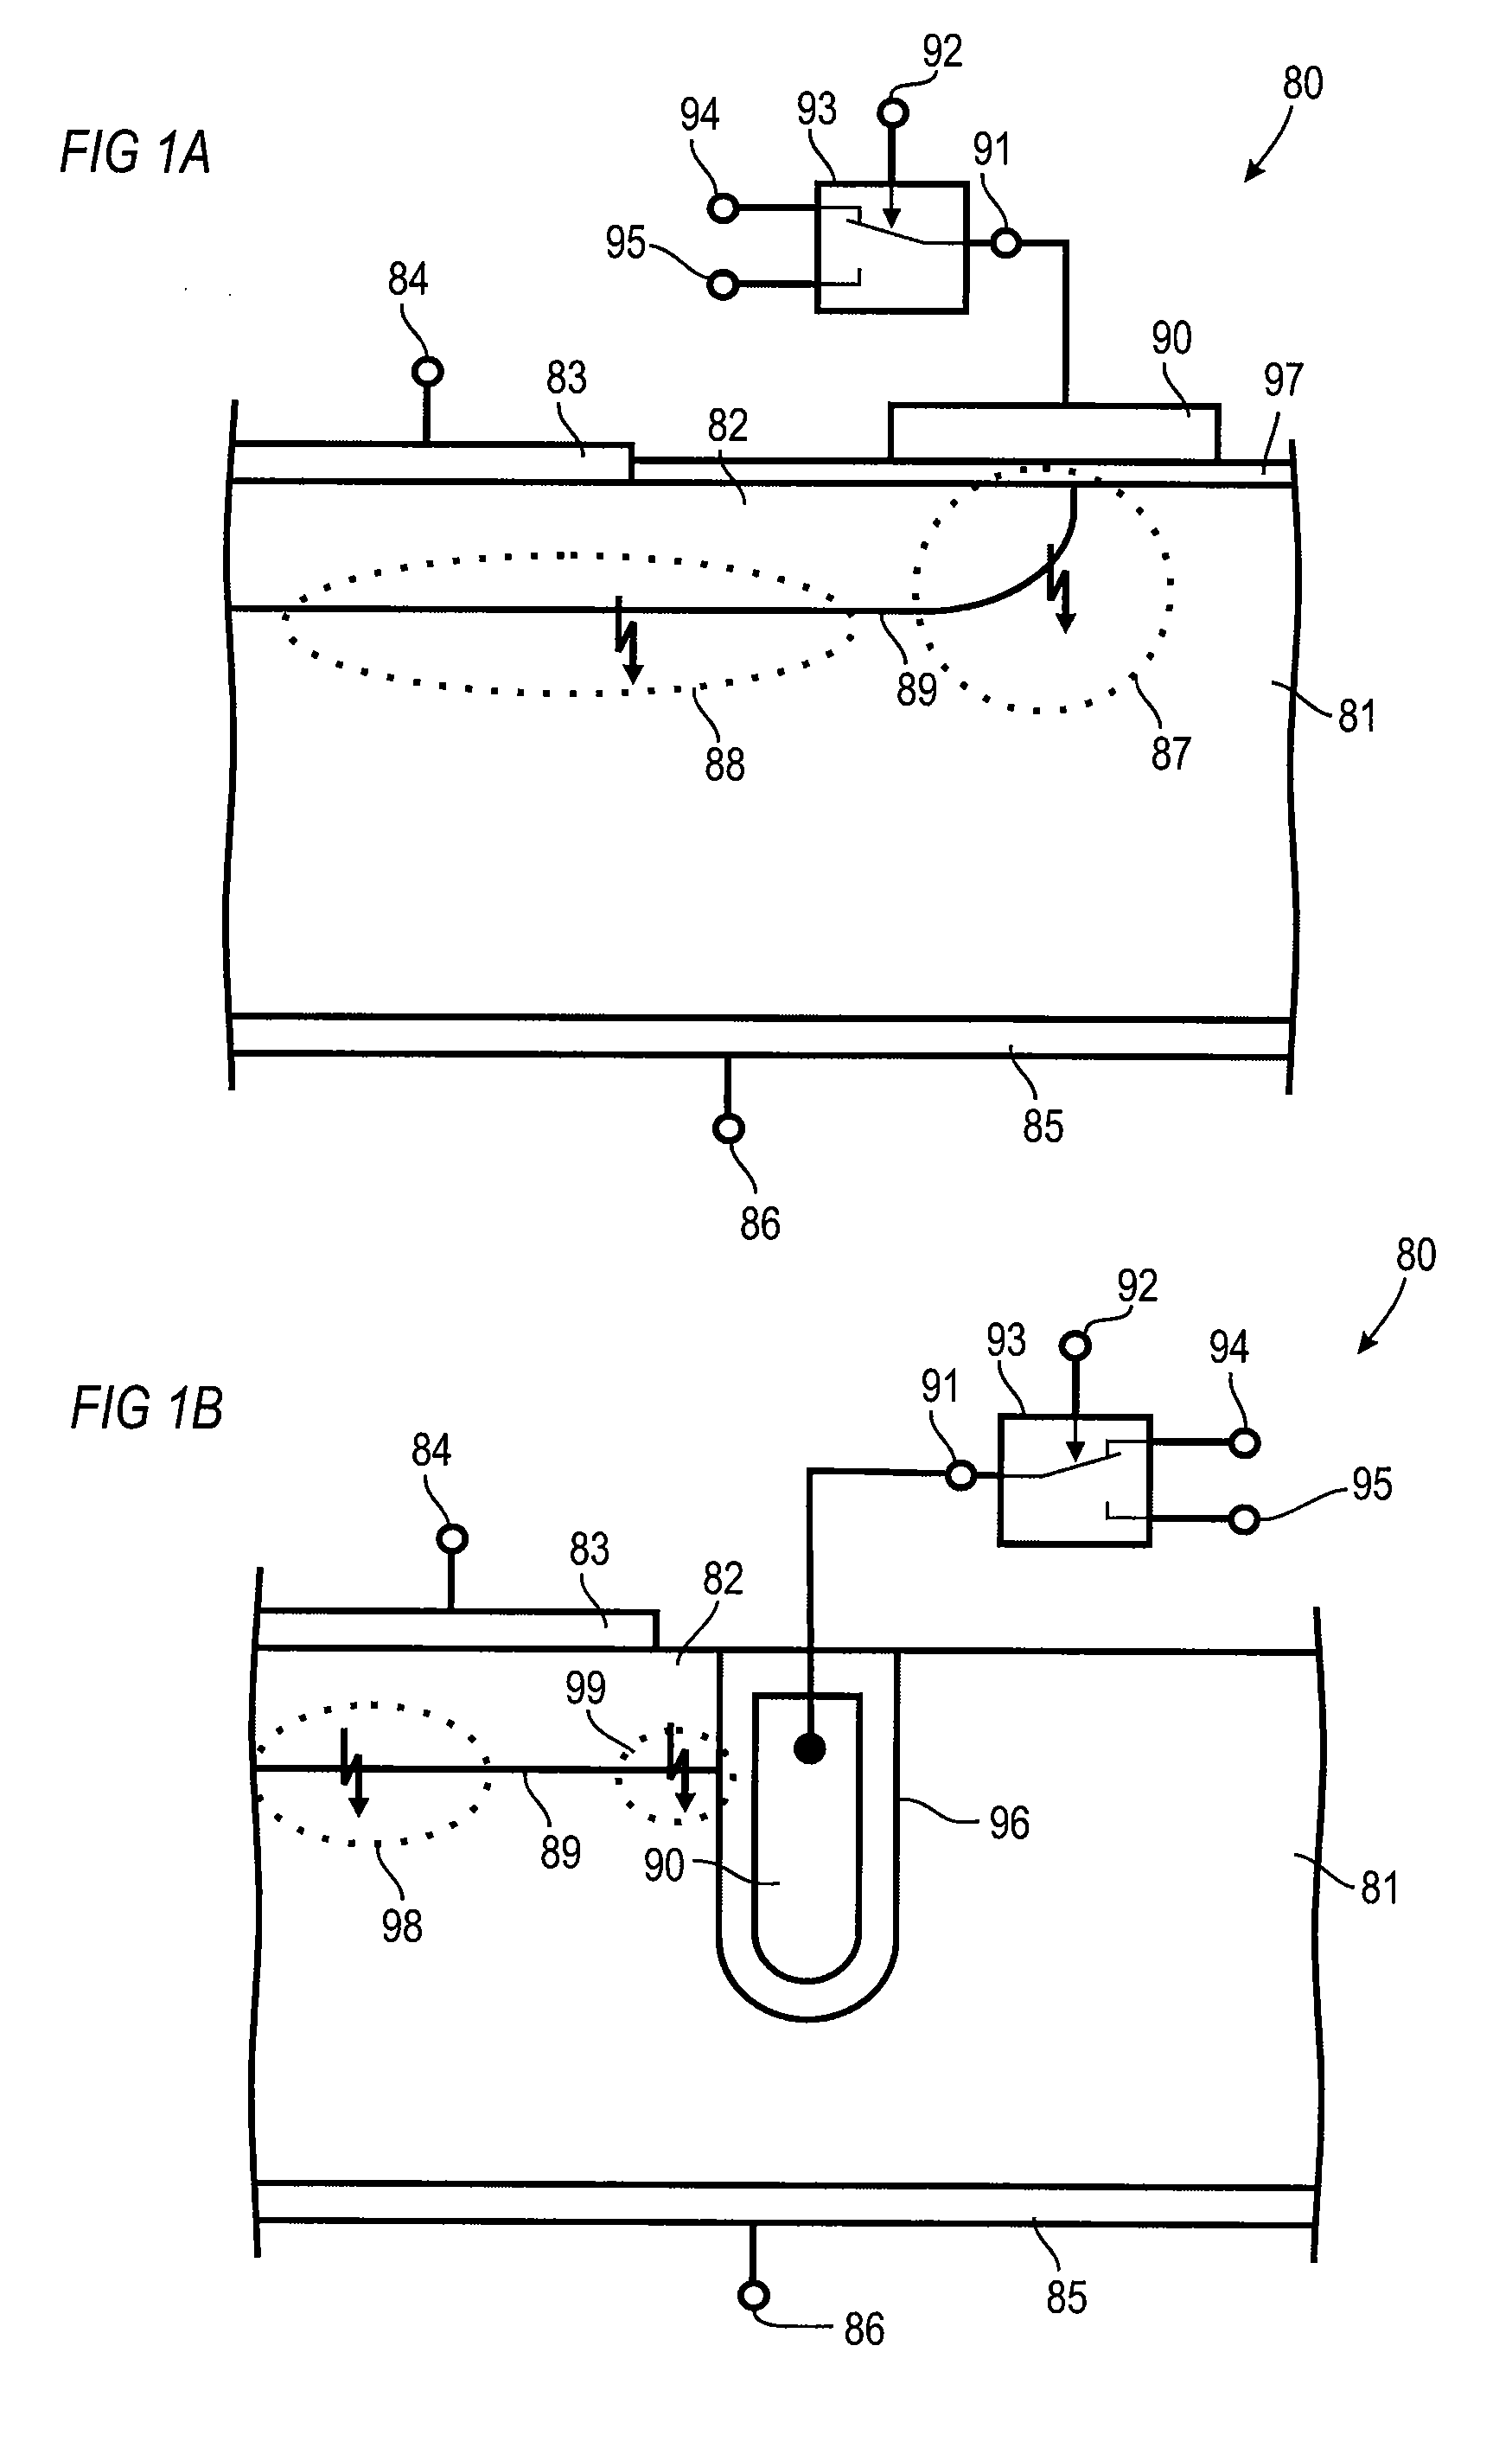 Semiconductor device, method for operating a semiconductor device and method for manufacturing a semiconductor device